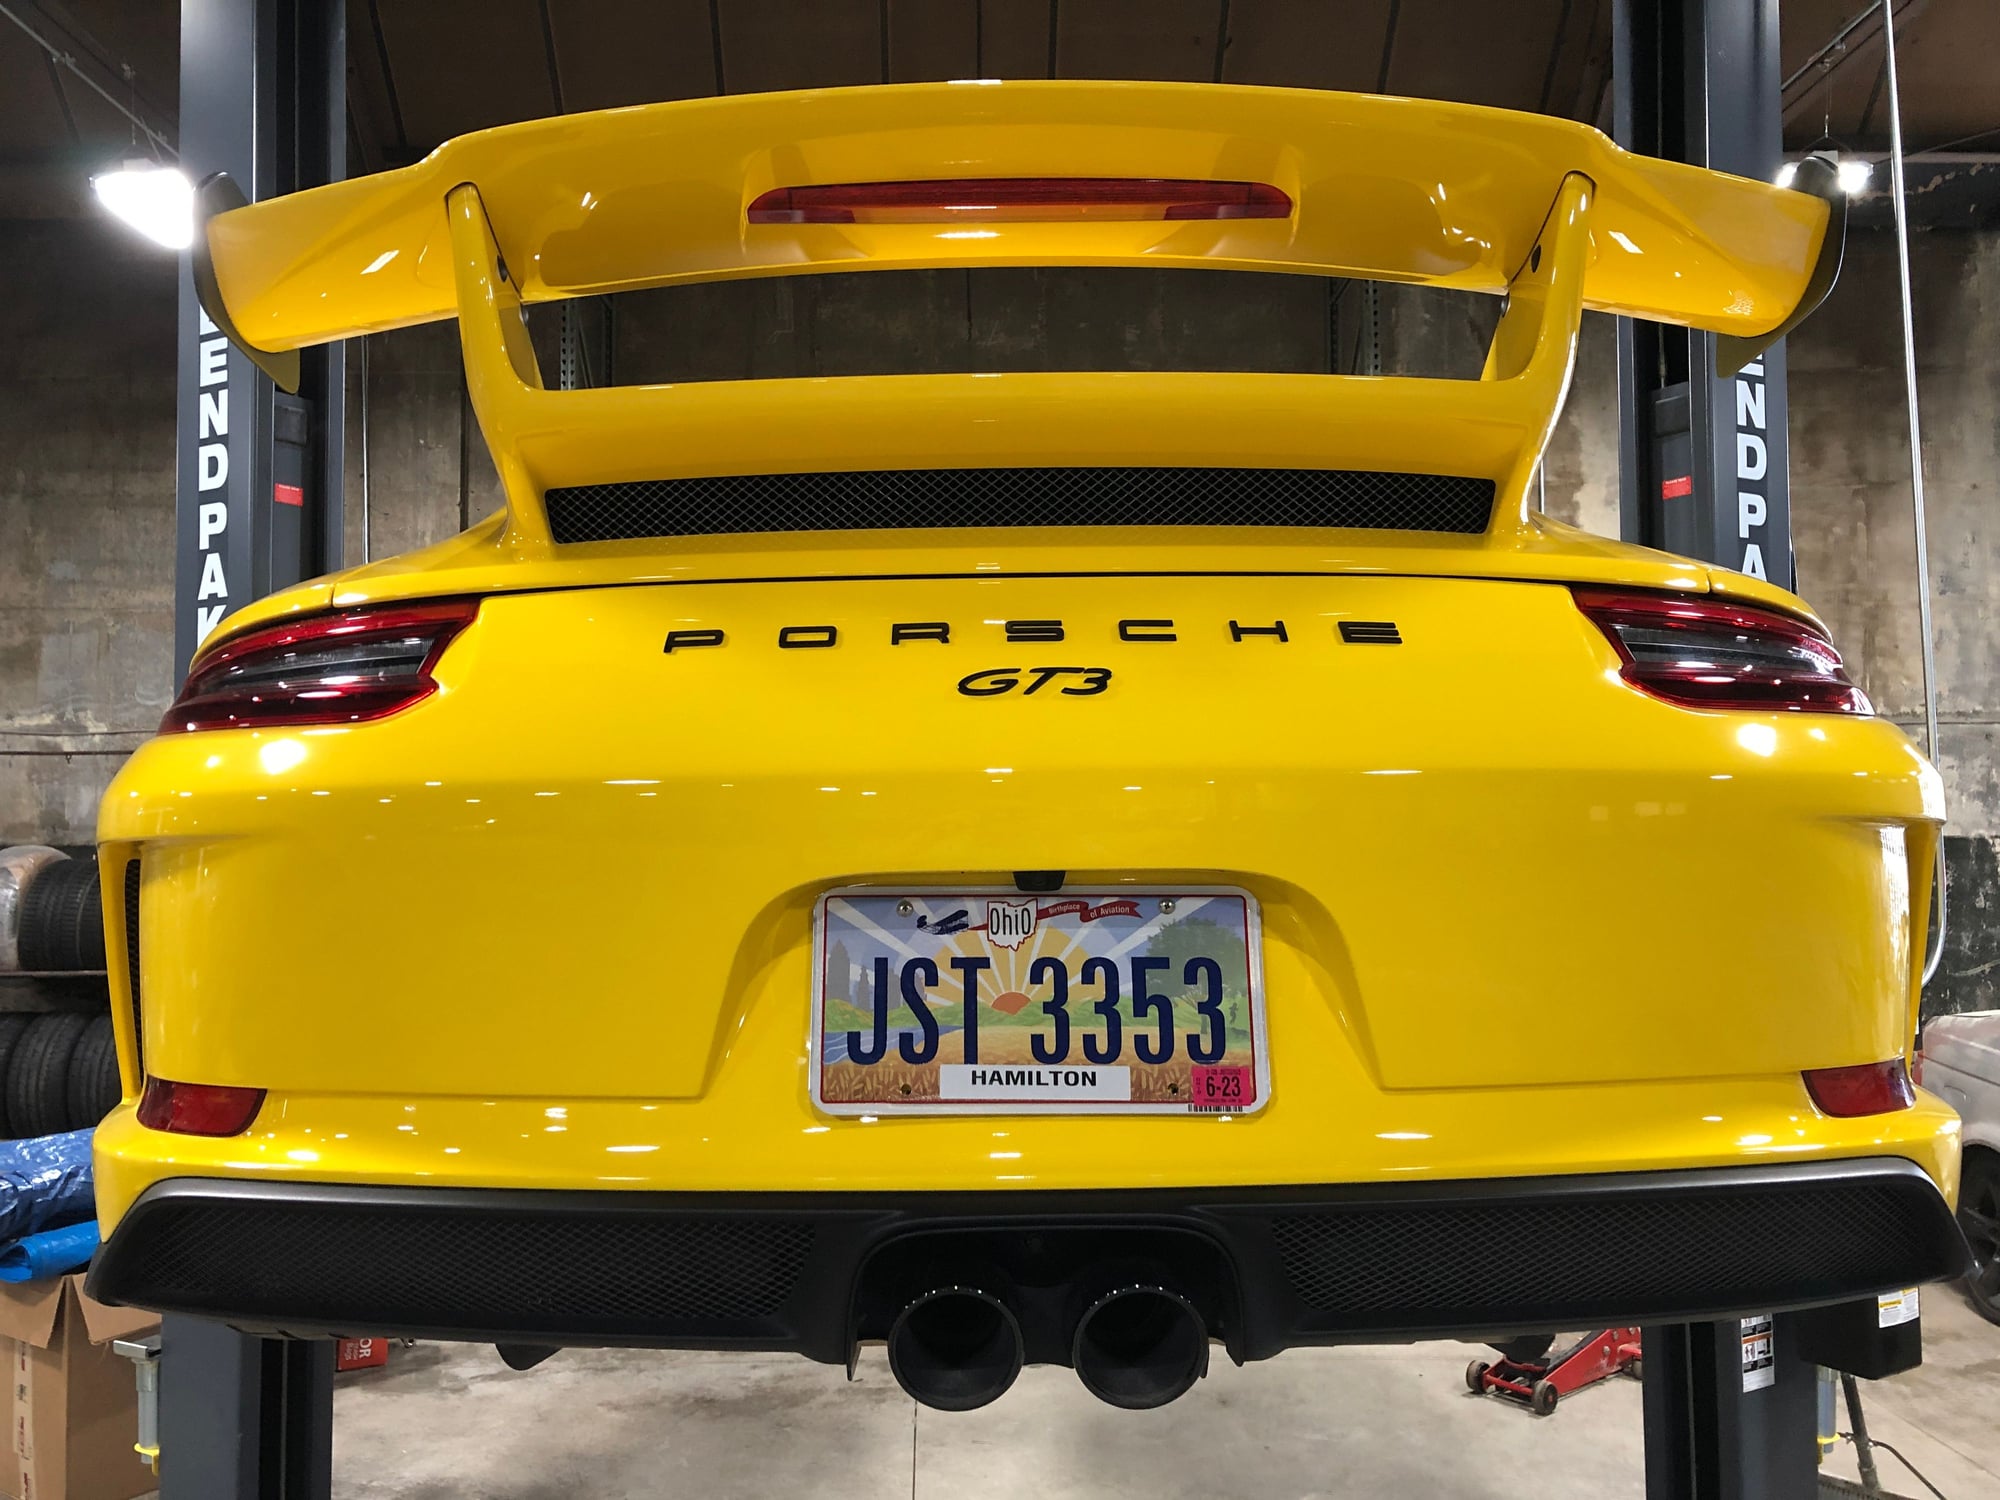 2018 Porsche GT3 - 2018 991.2 GT3 - 6 Speed - Used - VIN WP0AC2A93JS175420 - 34,360 Miles - 6 cyl - 2WD - Manual - Coupe - Yellow - Cincinnati, OH 45202, United States